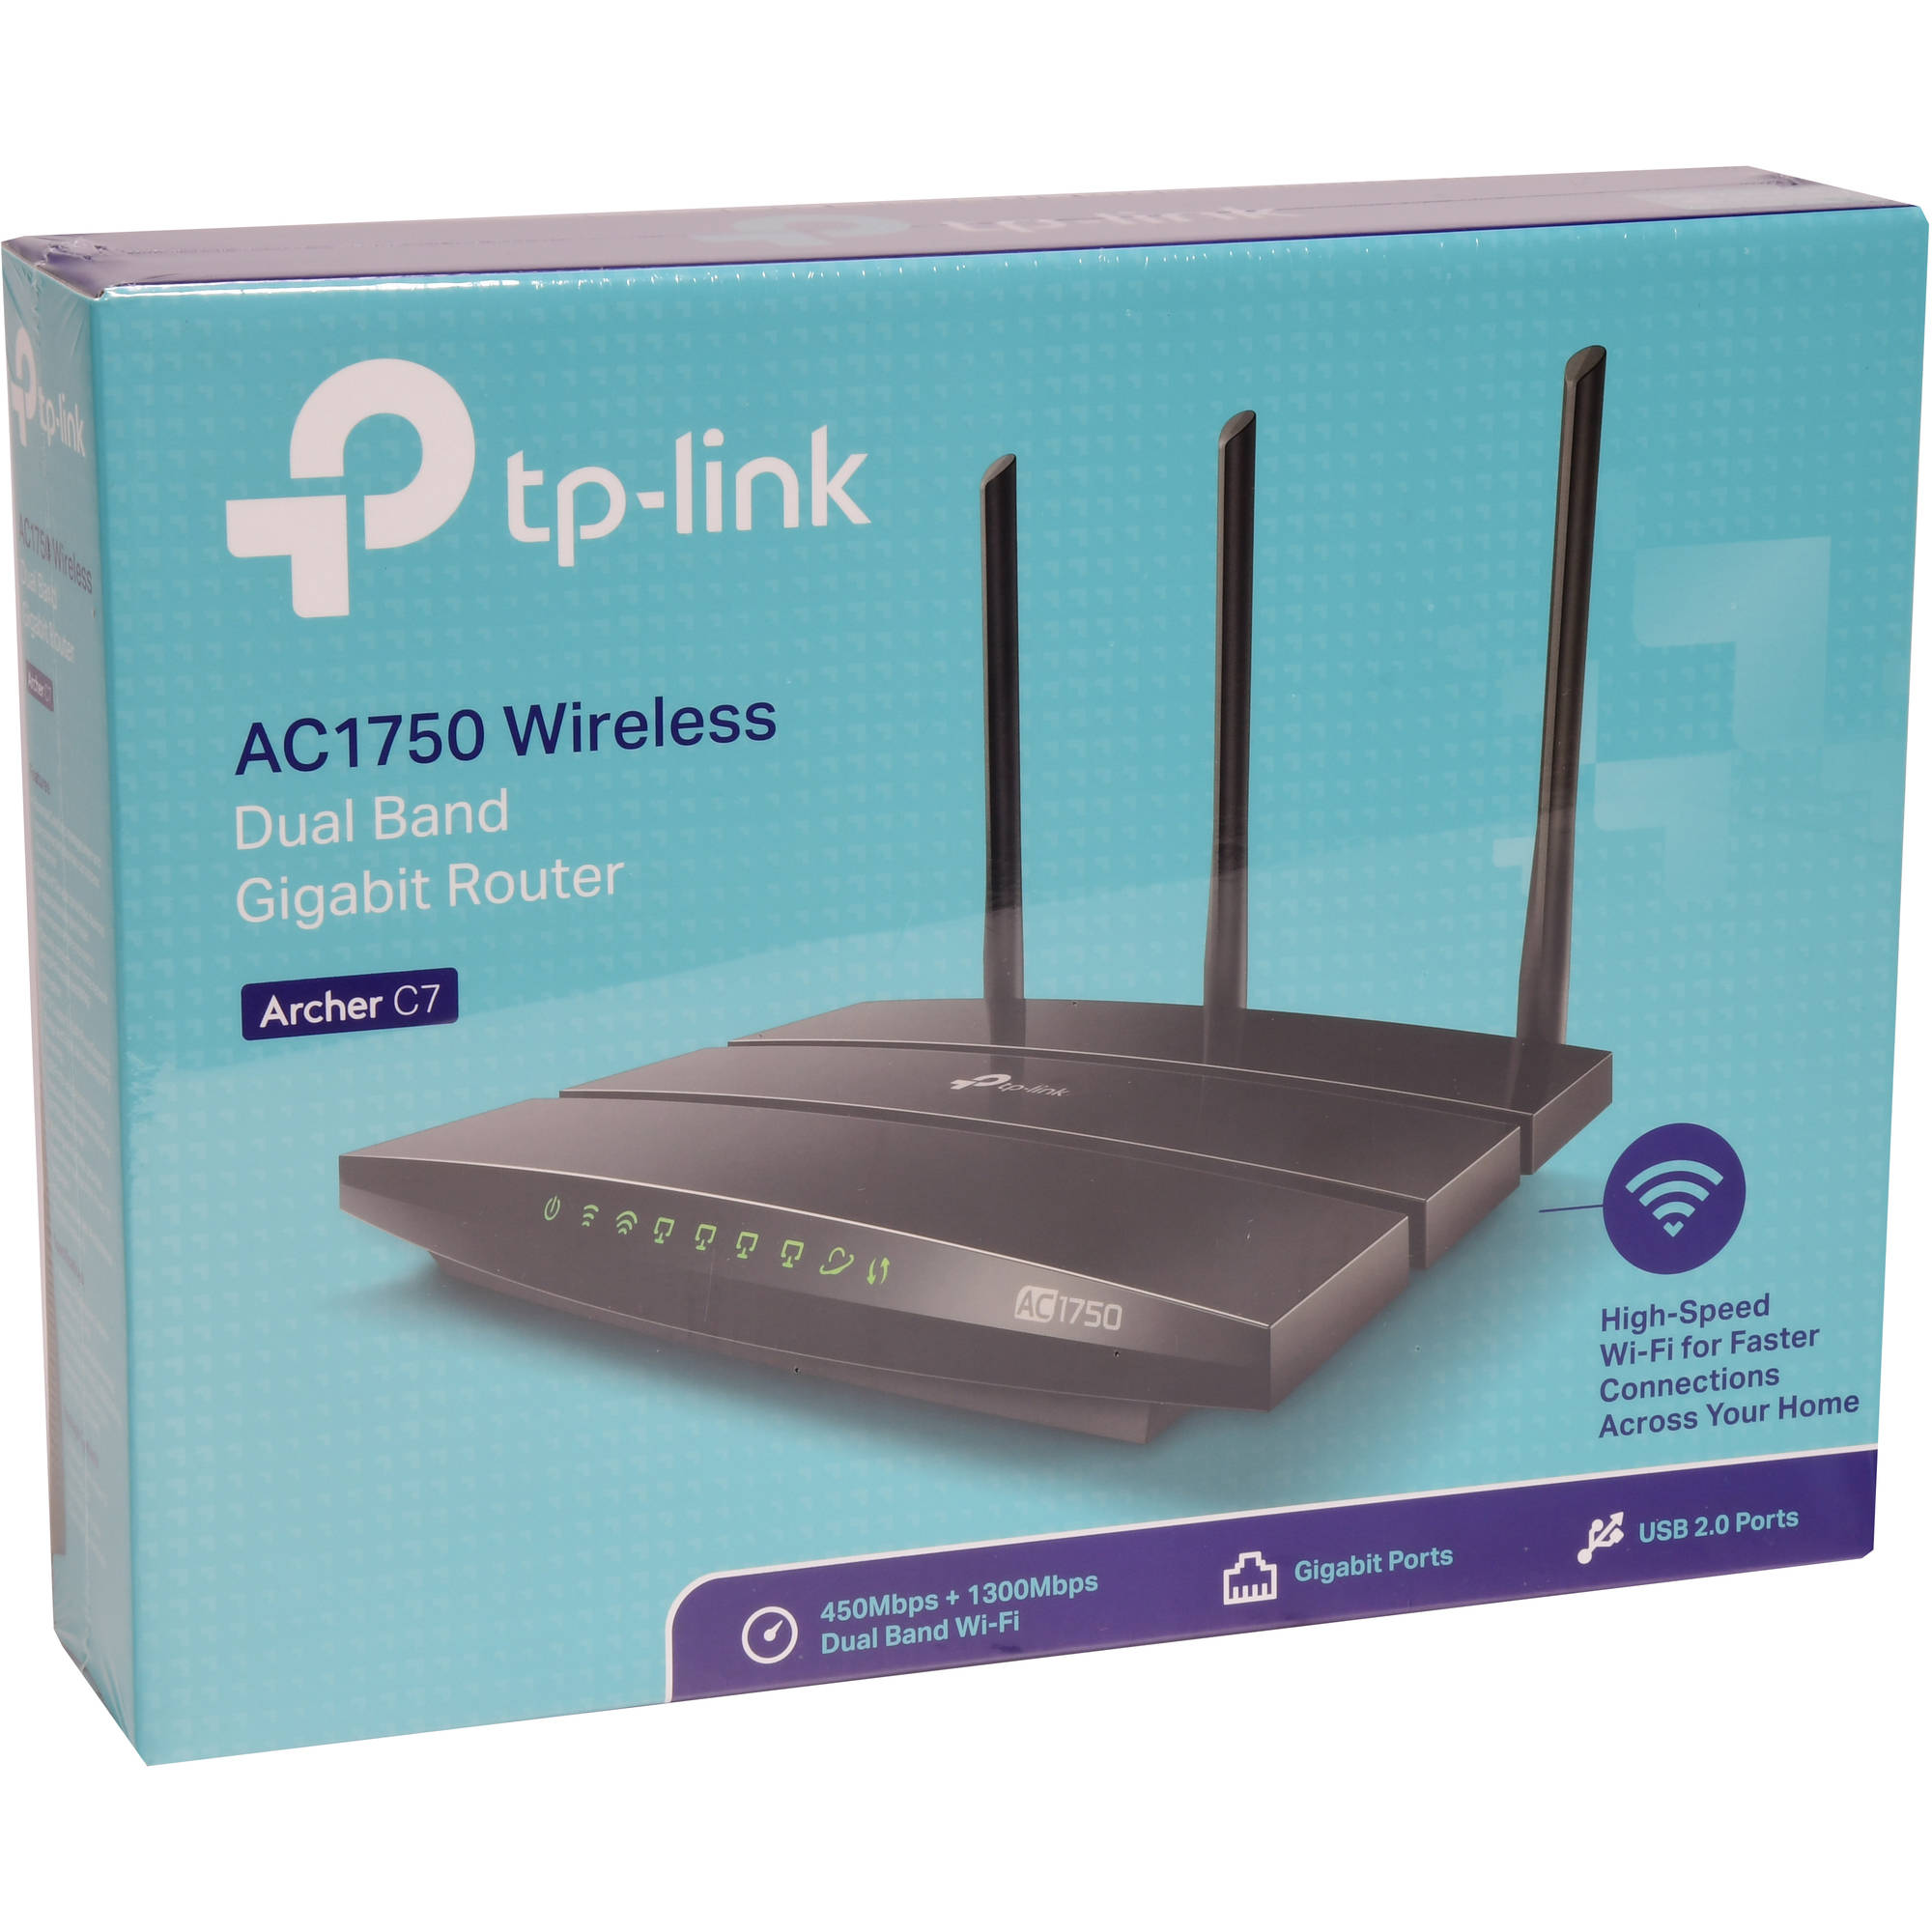 TP-LINK Archer C7 AC1750 Wireless Dual Band Gigabit Router - image 3 of 6